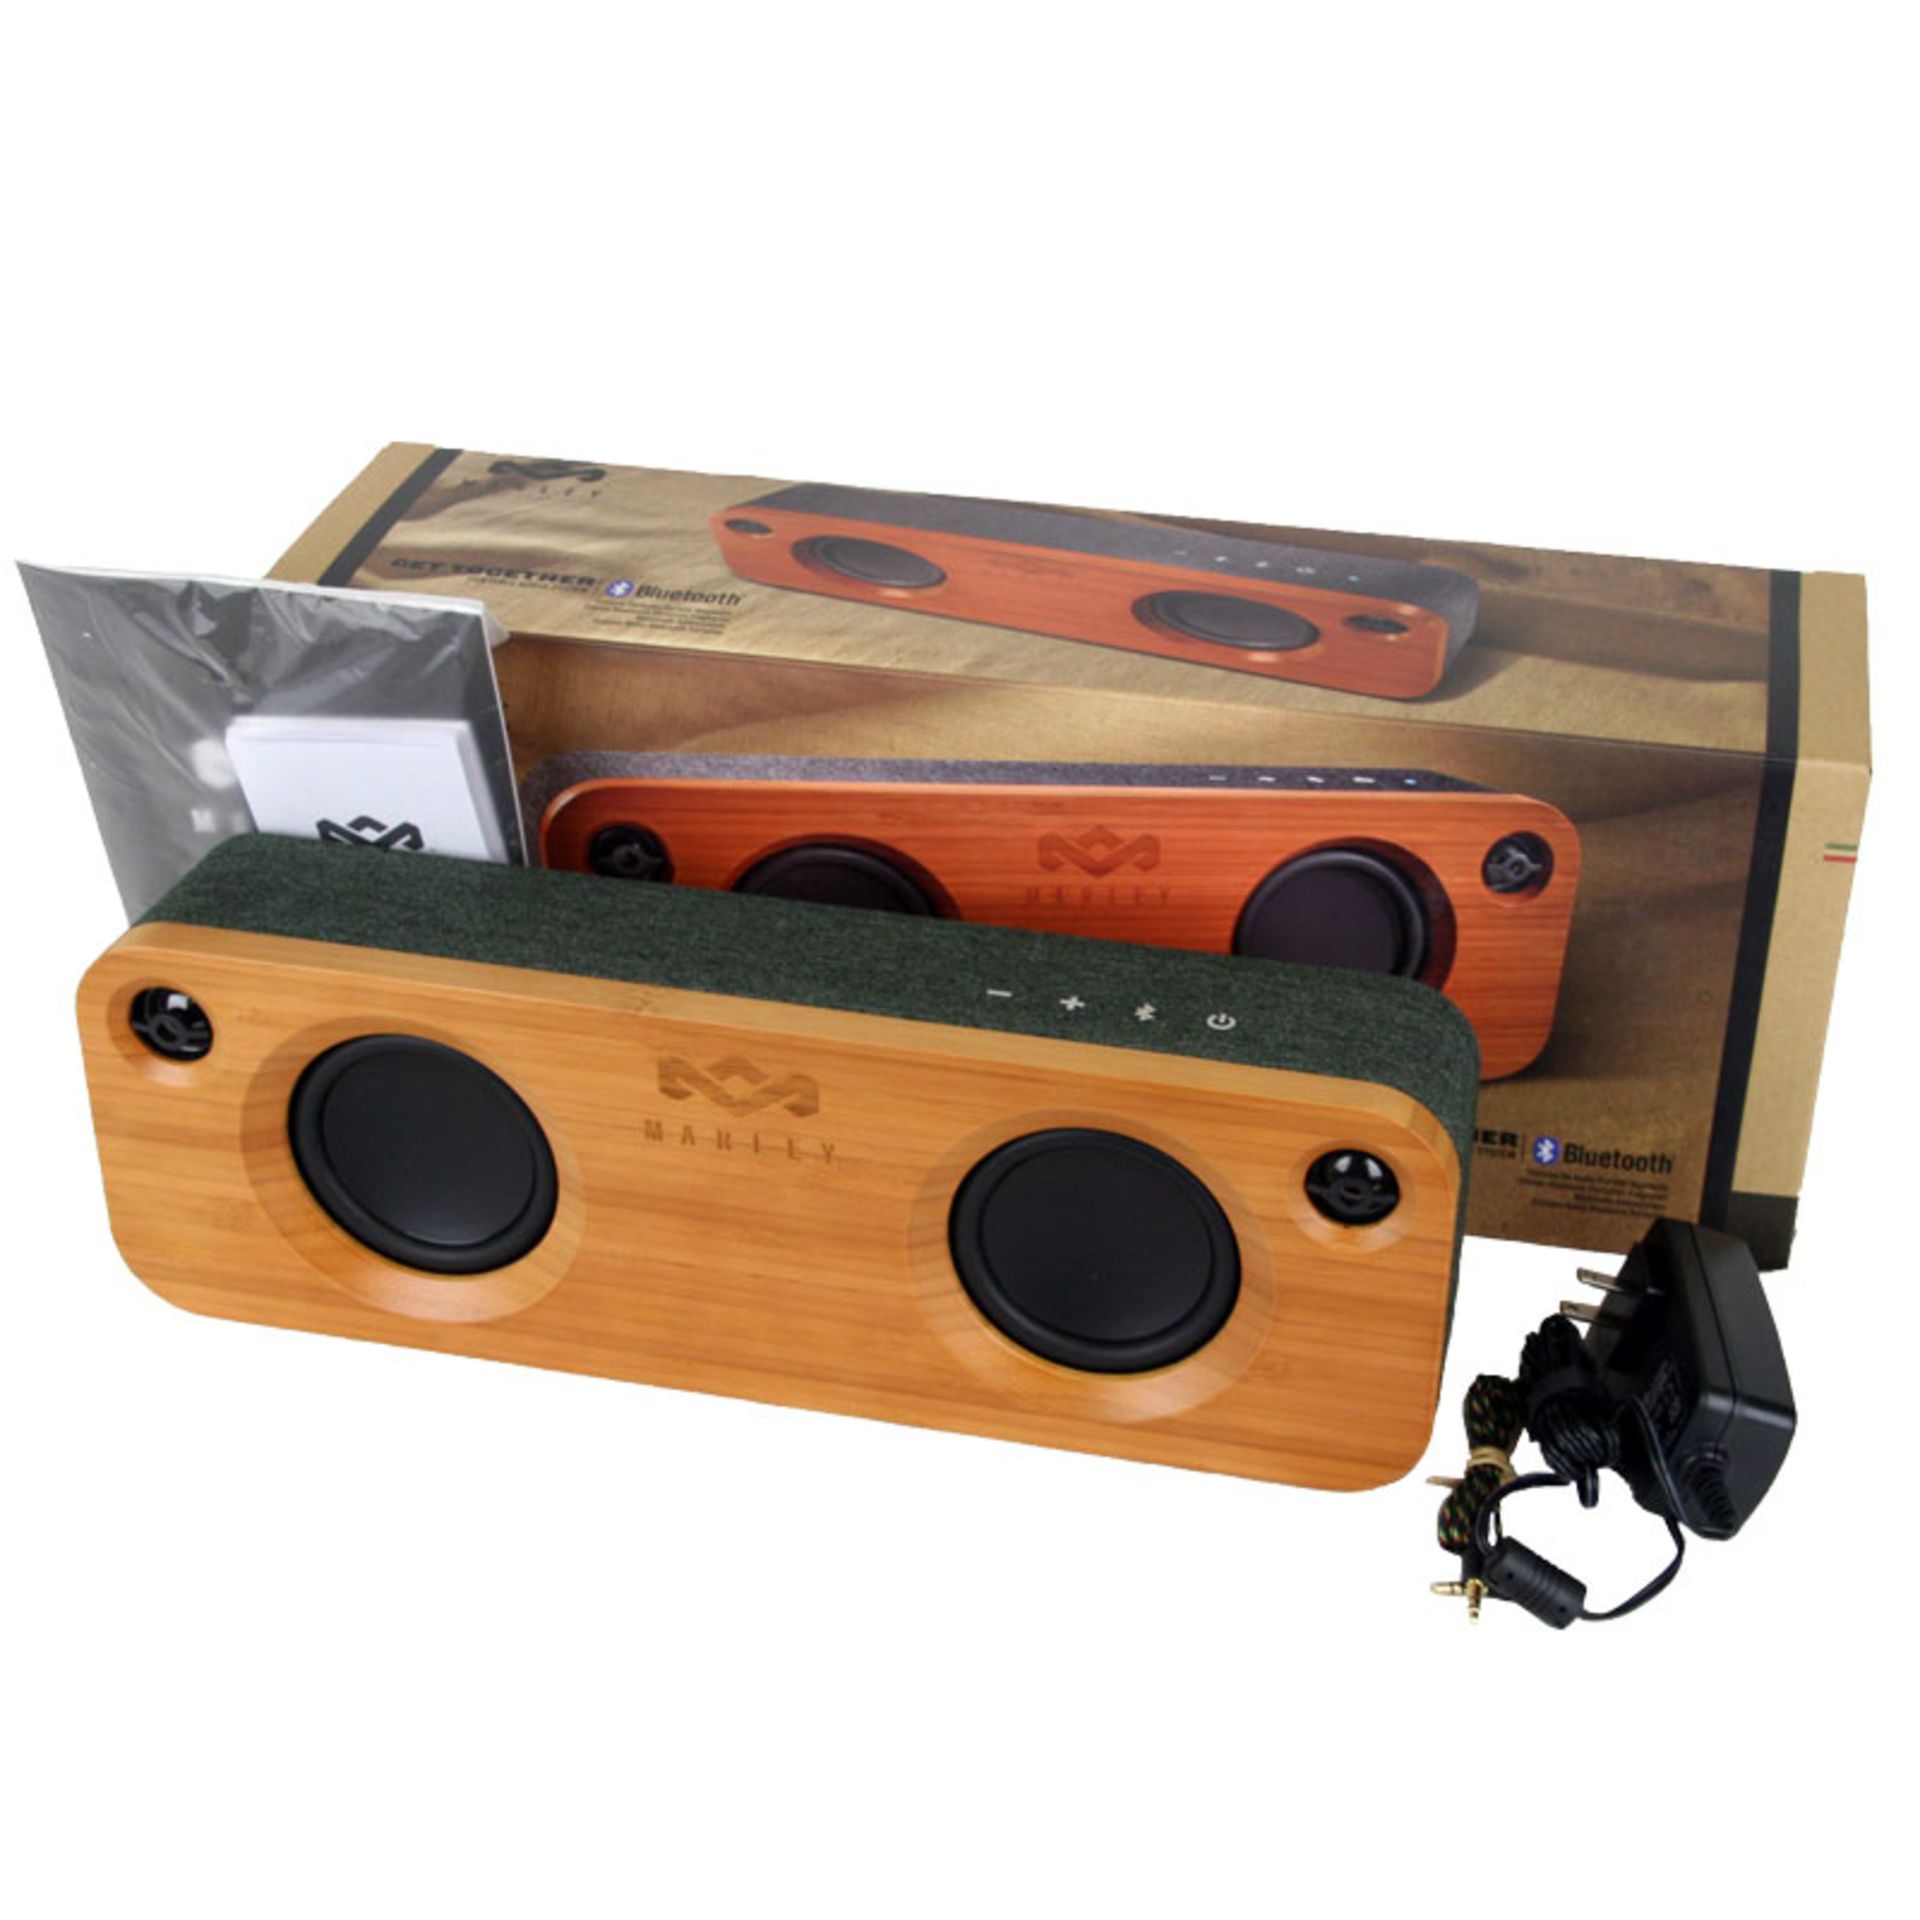 V Grade A Marley Get It Together Portable Audio System - Bluetooth - 8 Hour Battery - Exclusive - Image 2 of 4